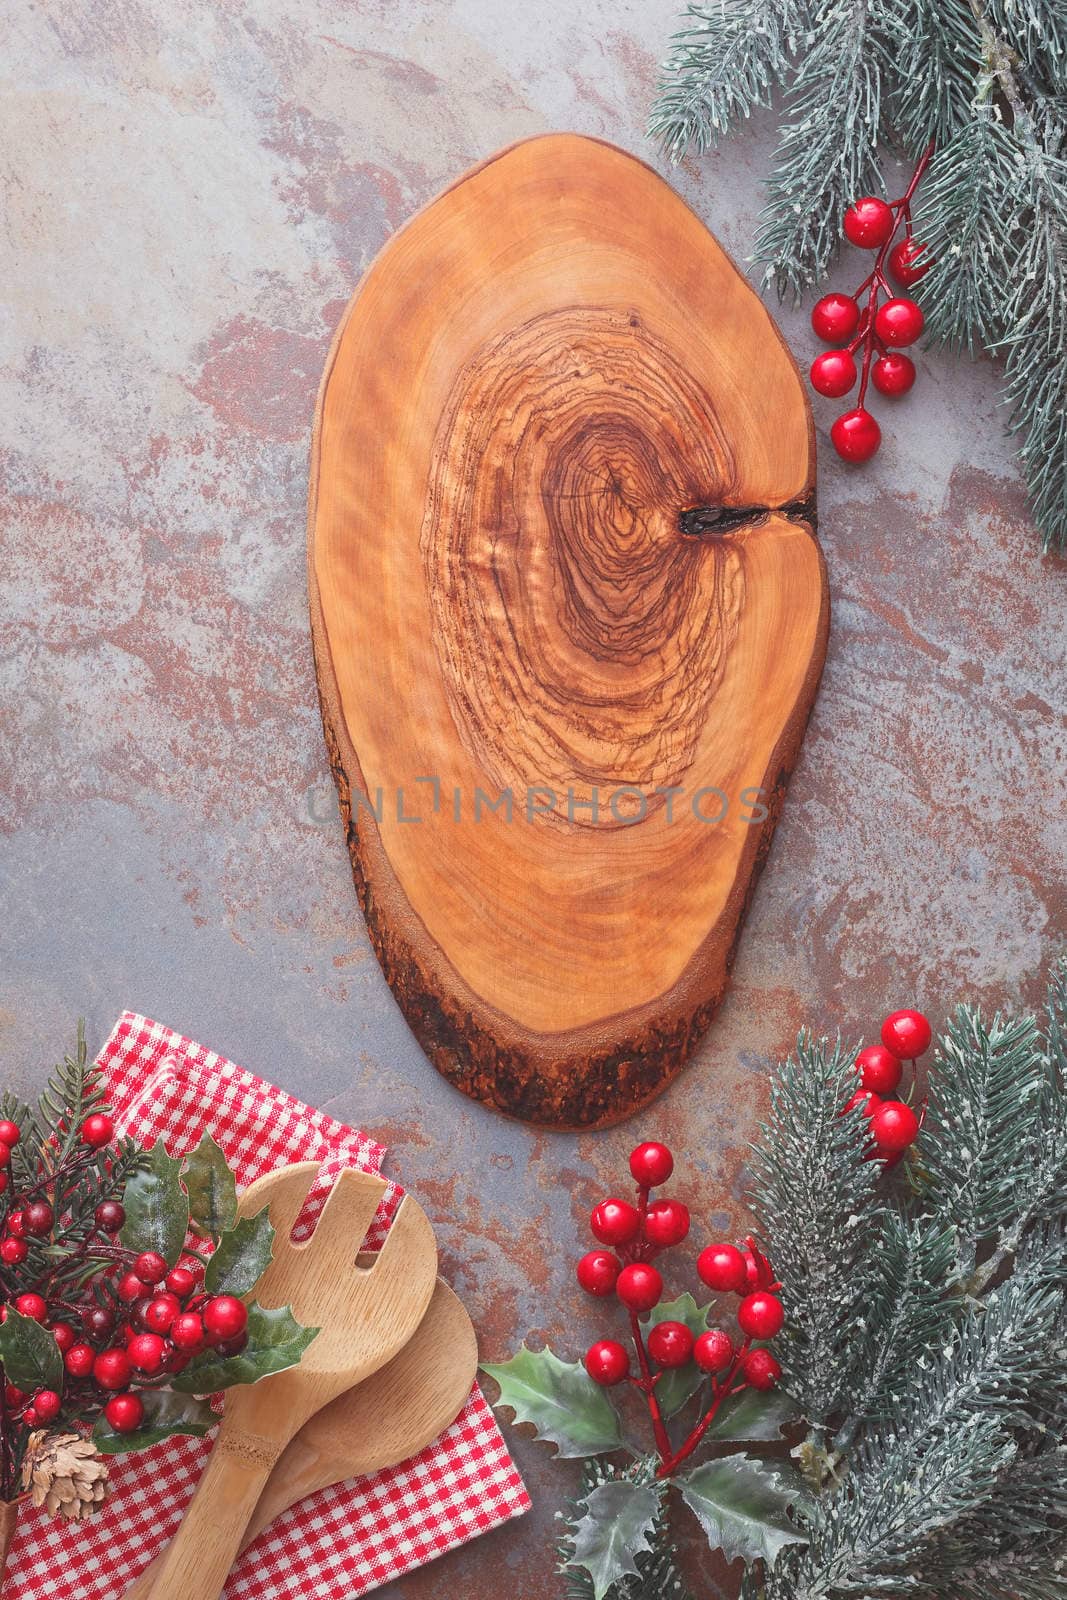 Old wooden kitchen utensils and cutting board on rustic table, Christmas cooking concept. Top view, vintage style, blank space